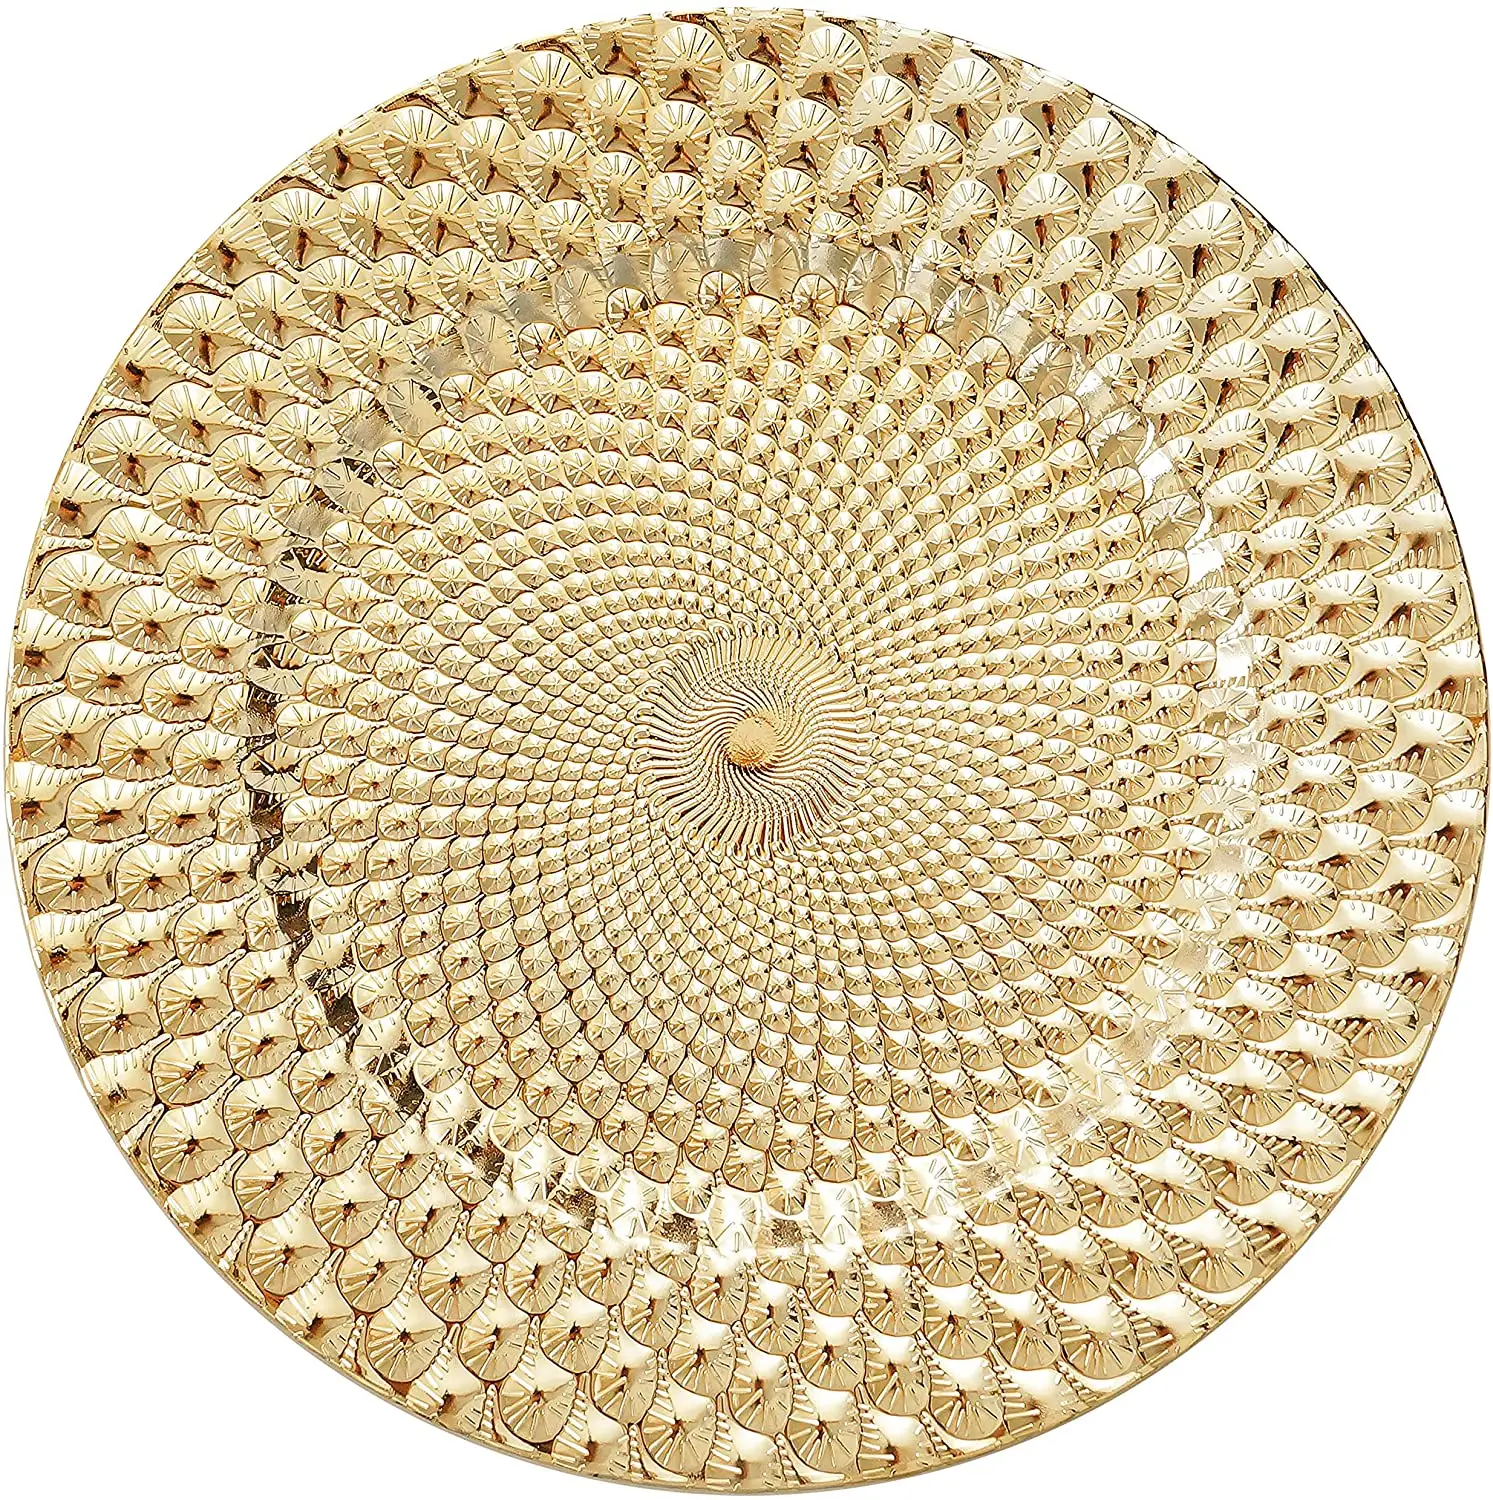 Tabletex Antique Gold Charger Plates with Embossed Rim, Plastic Large Plate Chargers for Dinner Plates